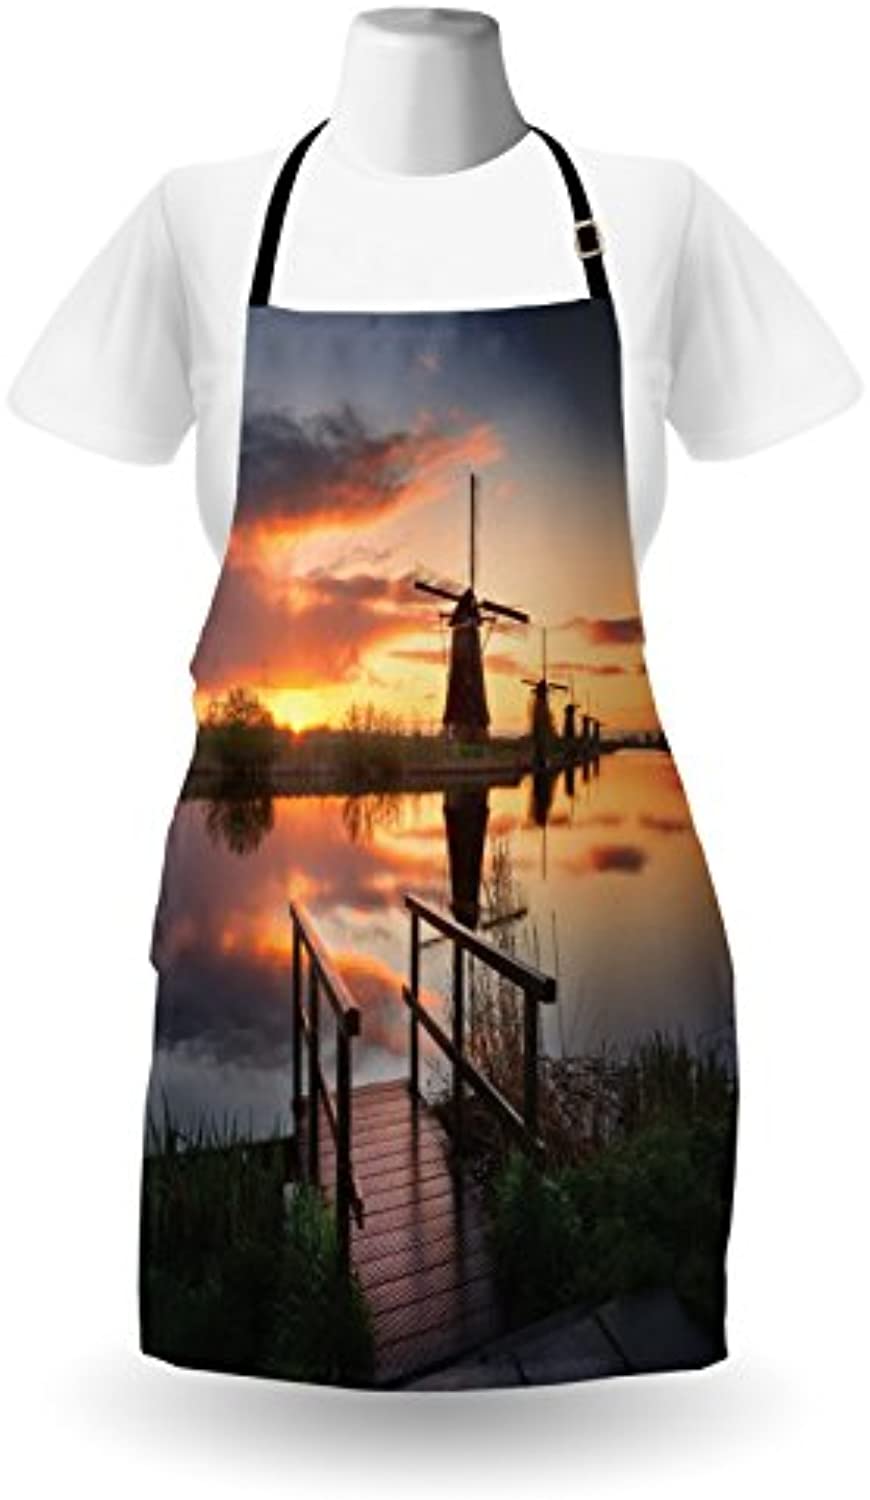 Granbey Nature Apron  Landscape with Traditional Famous Dutch Windmills on Background near Canal Photo  Unisex Kitchen Bib with Adjustable Neck for Cooking Gardening  Adult Size  Orange Blue